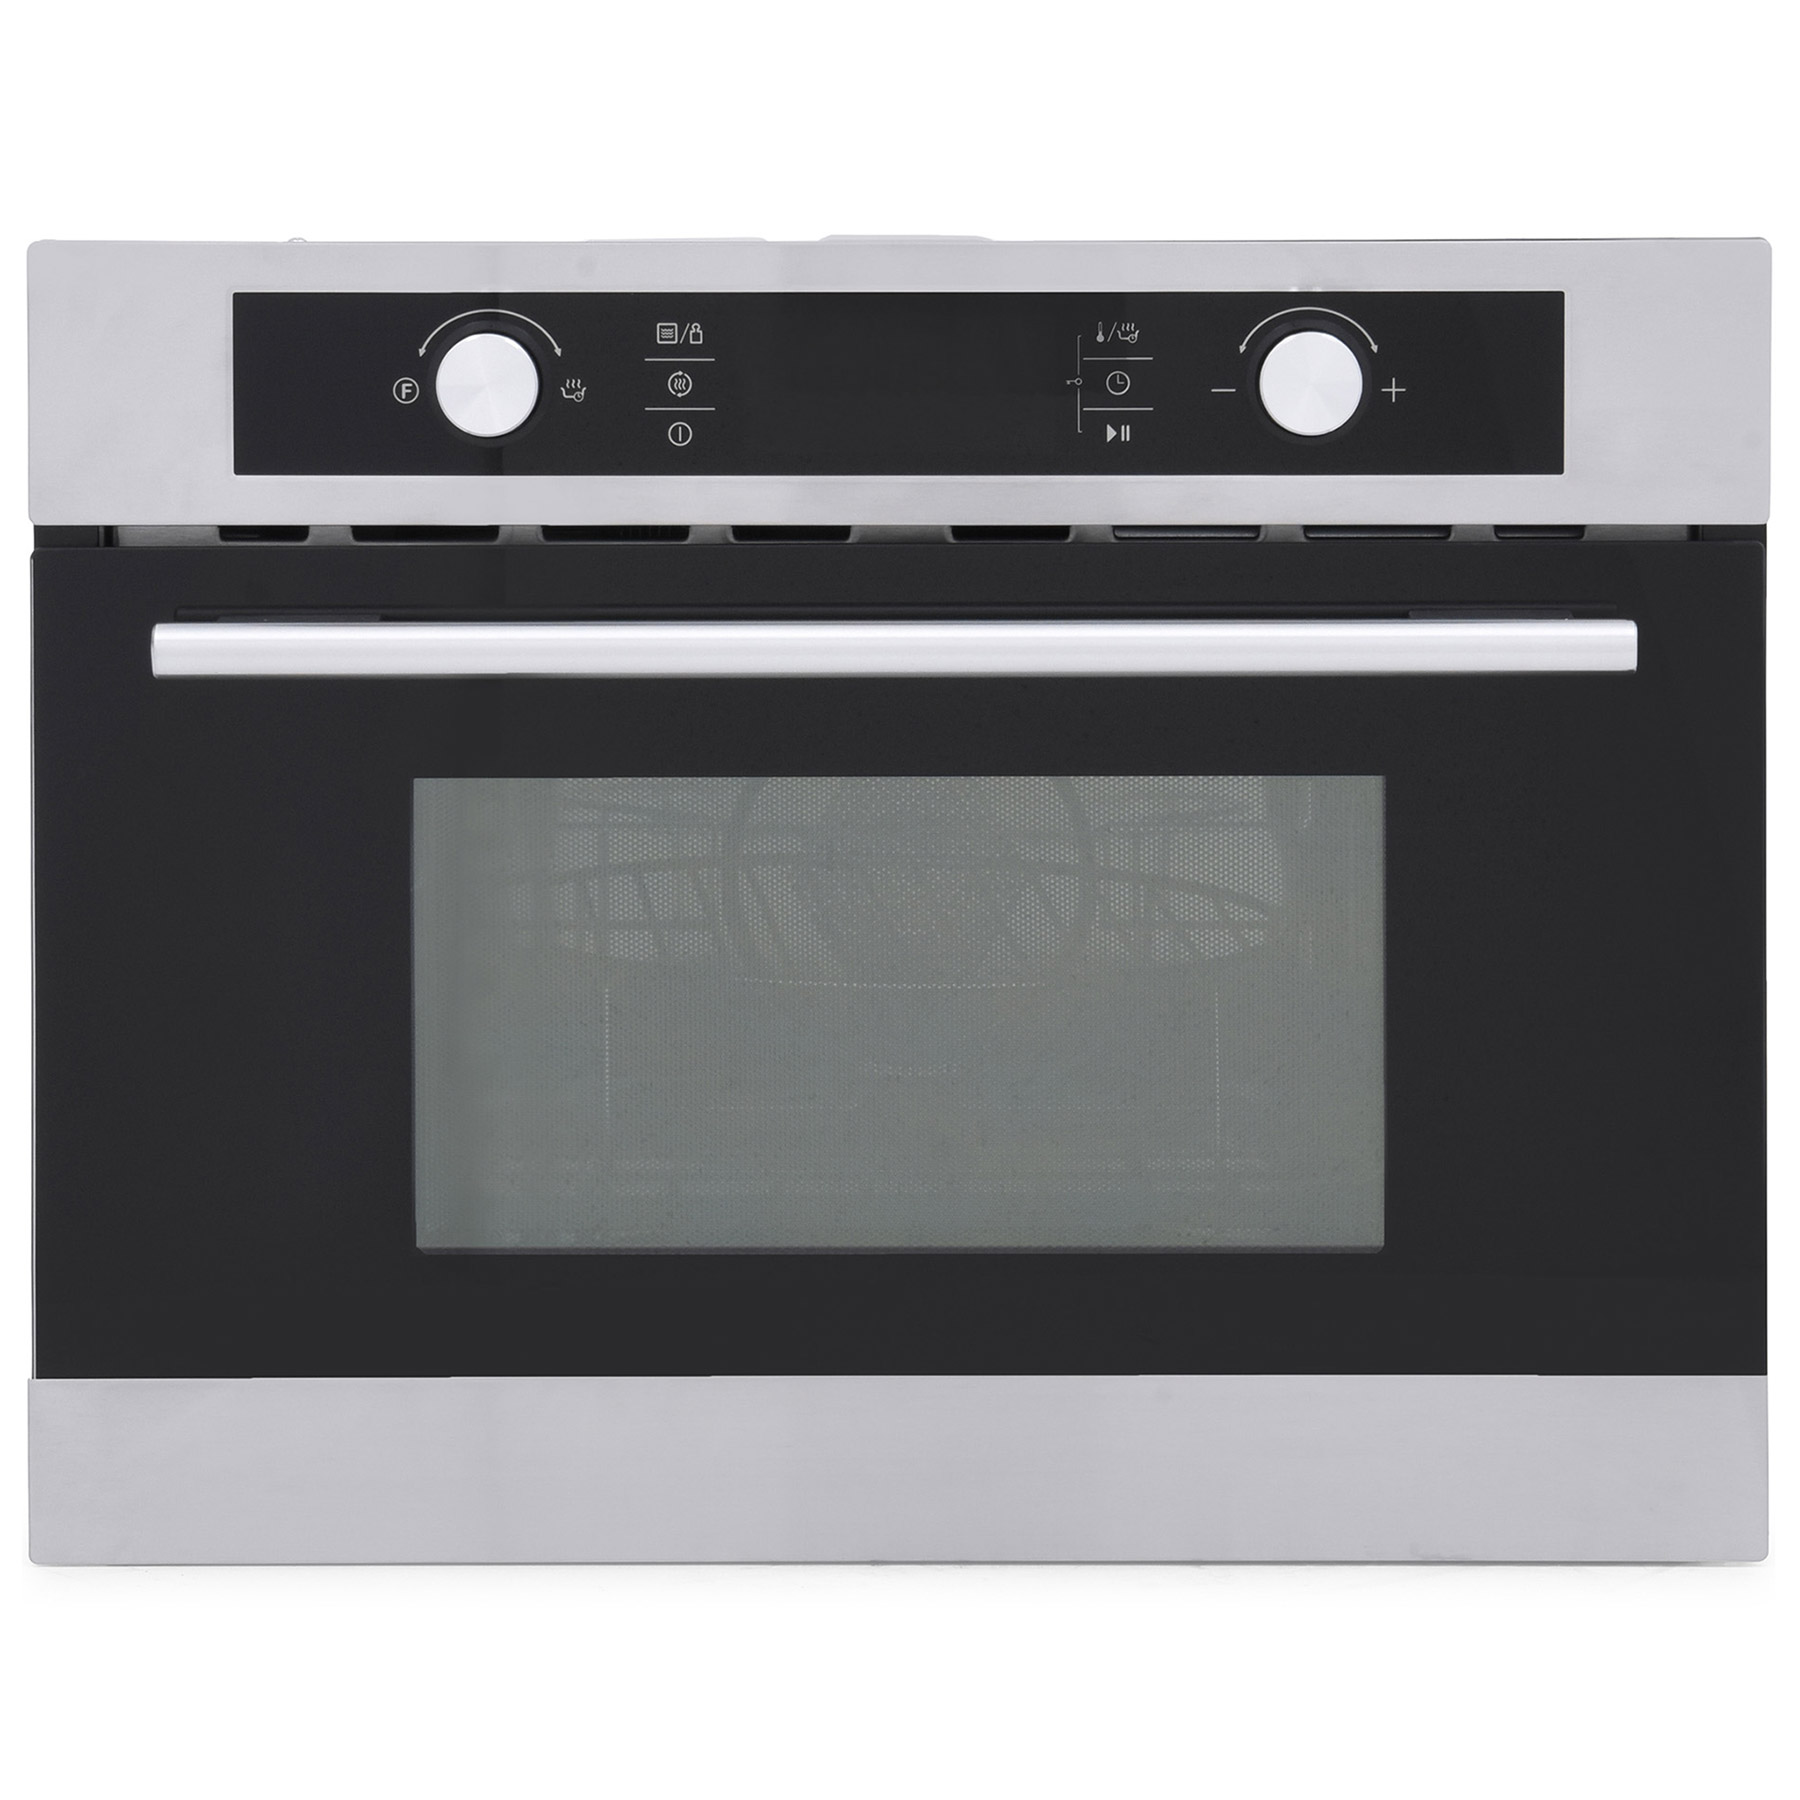 Image of Montpellier MWBIC90044 Built In Combi Microwave Oven in St Steel 900W